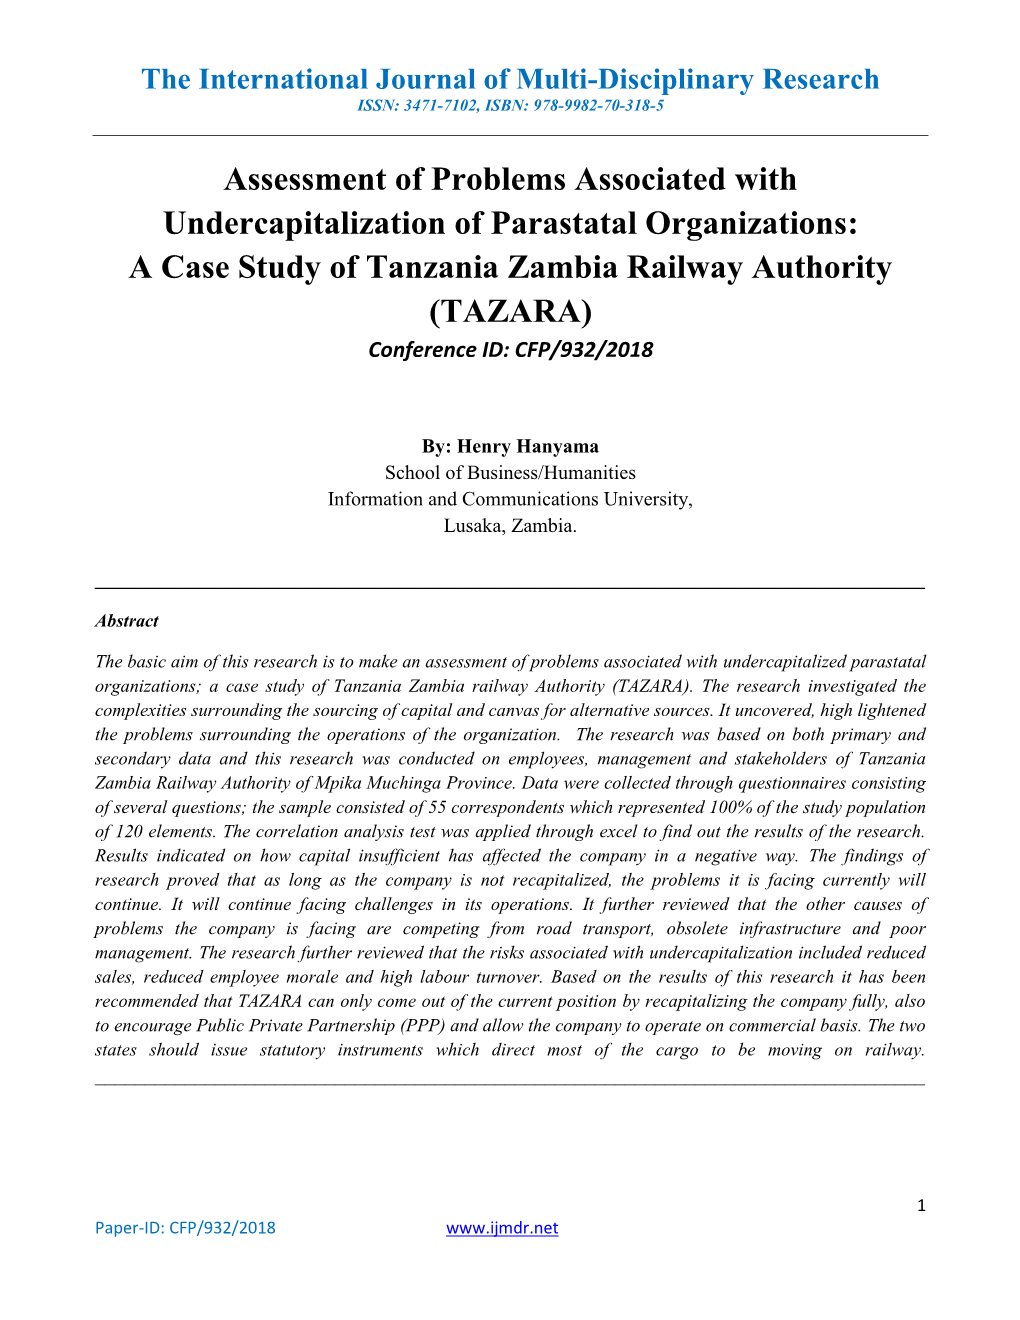 Assessment of Problems Associated with Undercapitalized Parastatal Organizations a Case Study of Tanzania Zambia Railway Authority